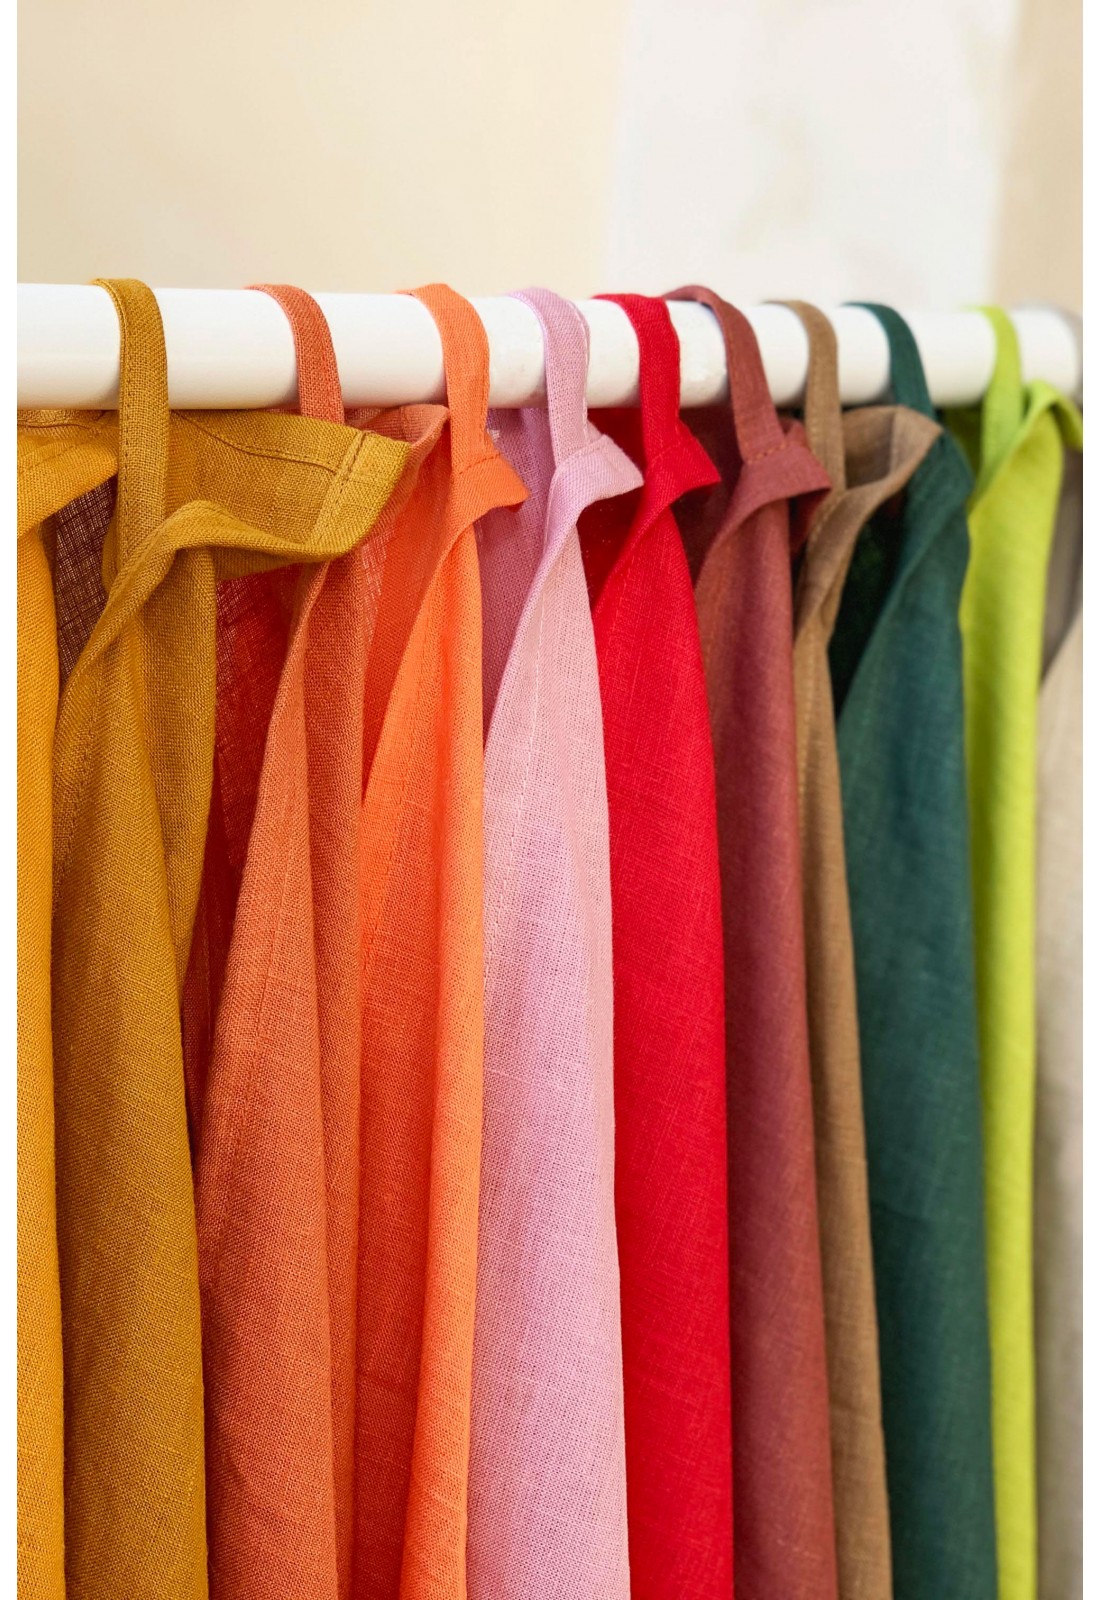 https://www.touchablelinen.com/image/cache/catalog/products/19/Linen-towel-All-colors-and-size-6-1100x1600.jpg